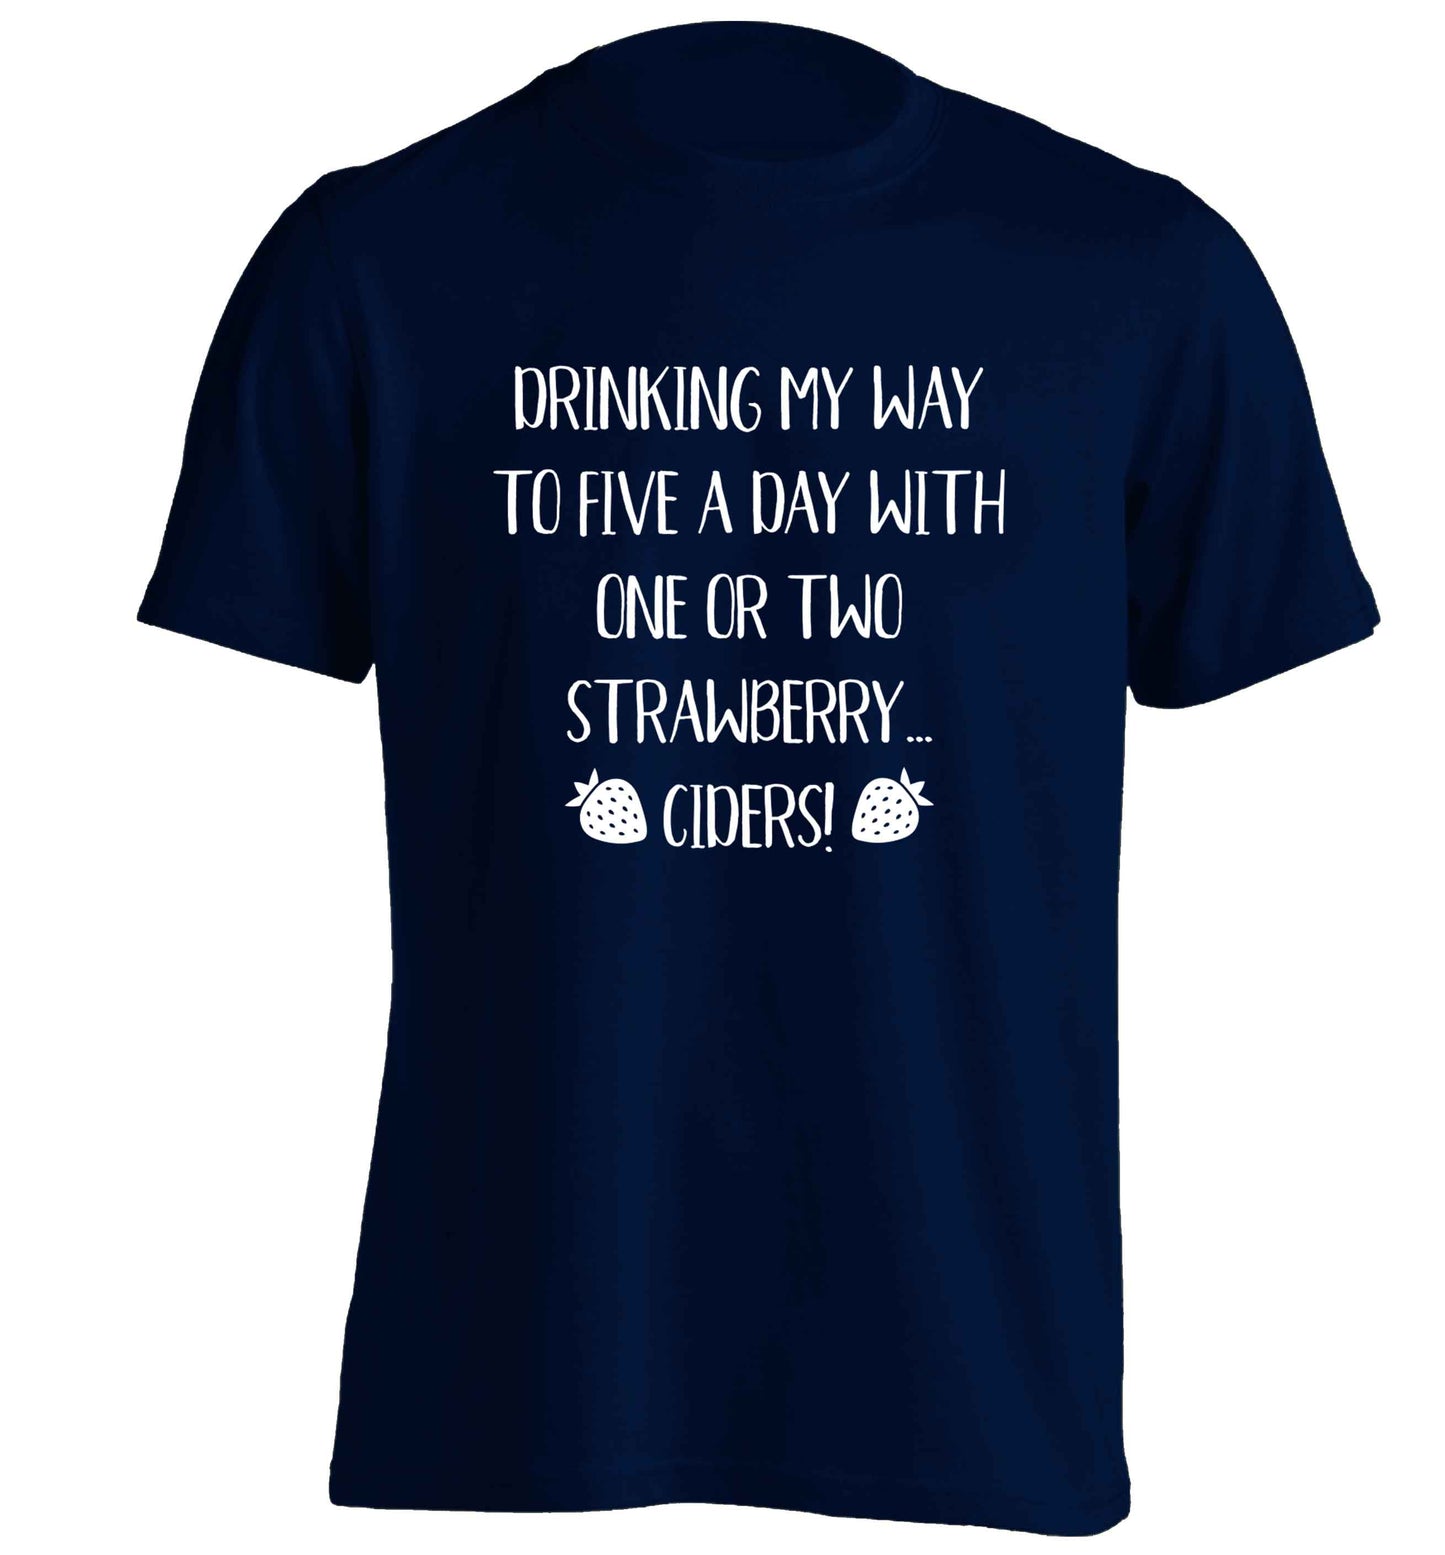 Drinking my way to five a day with one or two strawberry ciders adults unisex navy Tshirt 2XL